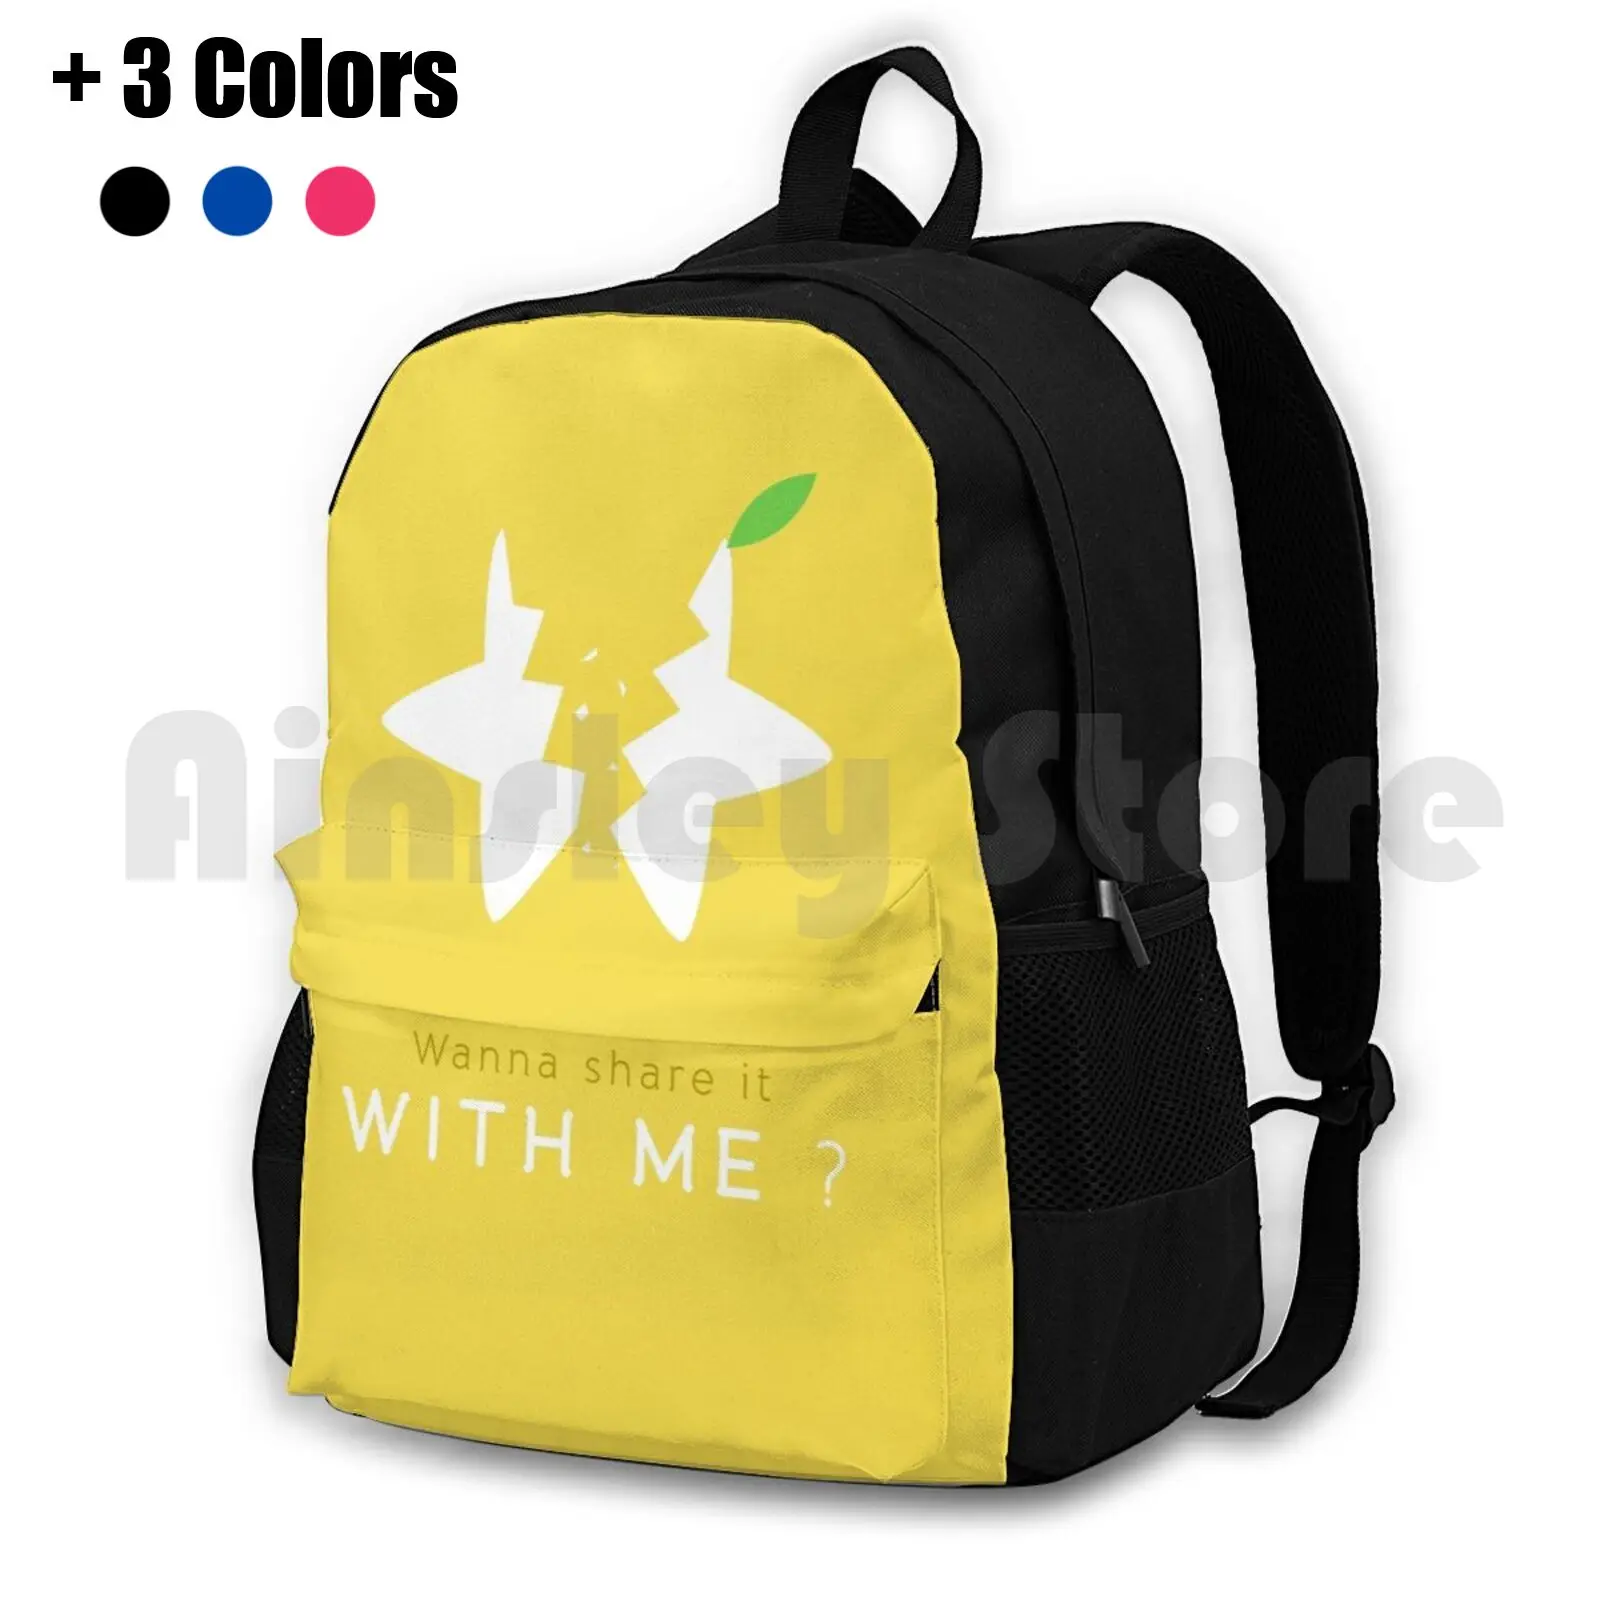 

Share With Me A Paopu Fruit Outdoor Hiking Backpack Riding Climbing Sports Bag Kh Kingdom Hearts Square Enix Video Game Game